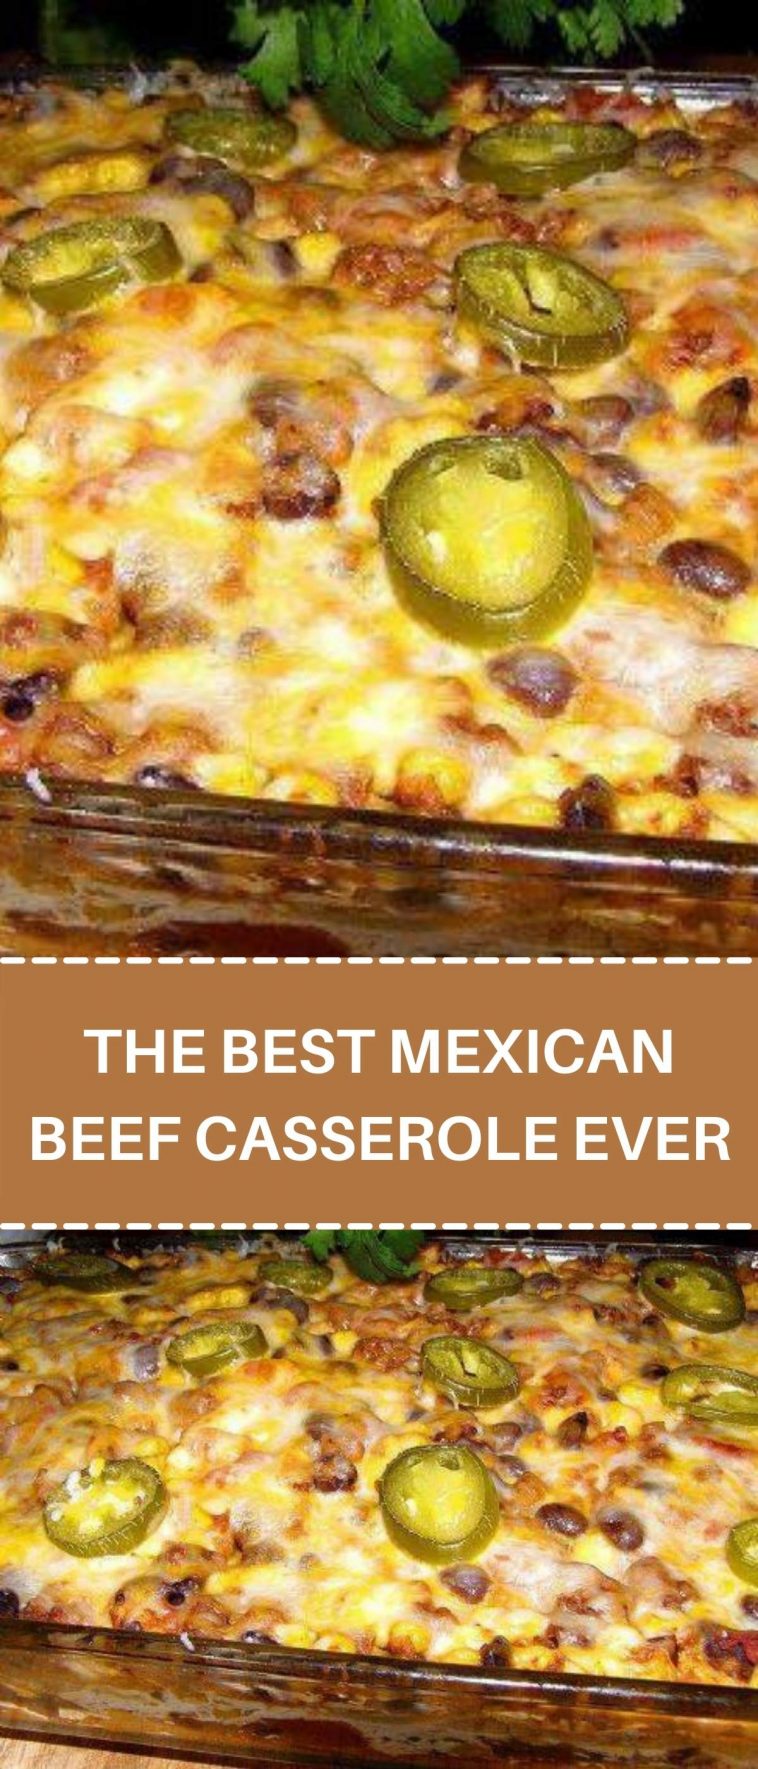 THE BEST MEXICAN BEEF CASSEROLE EVER